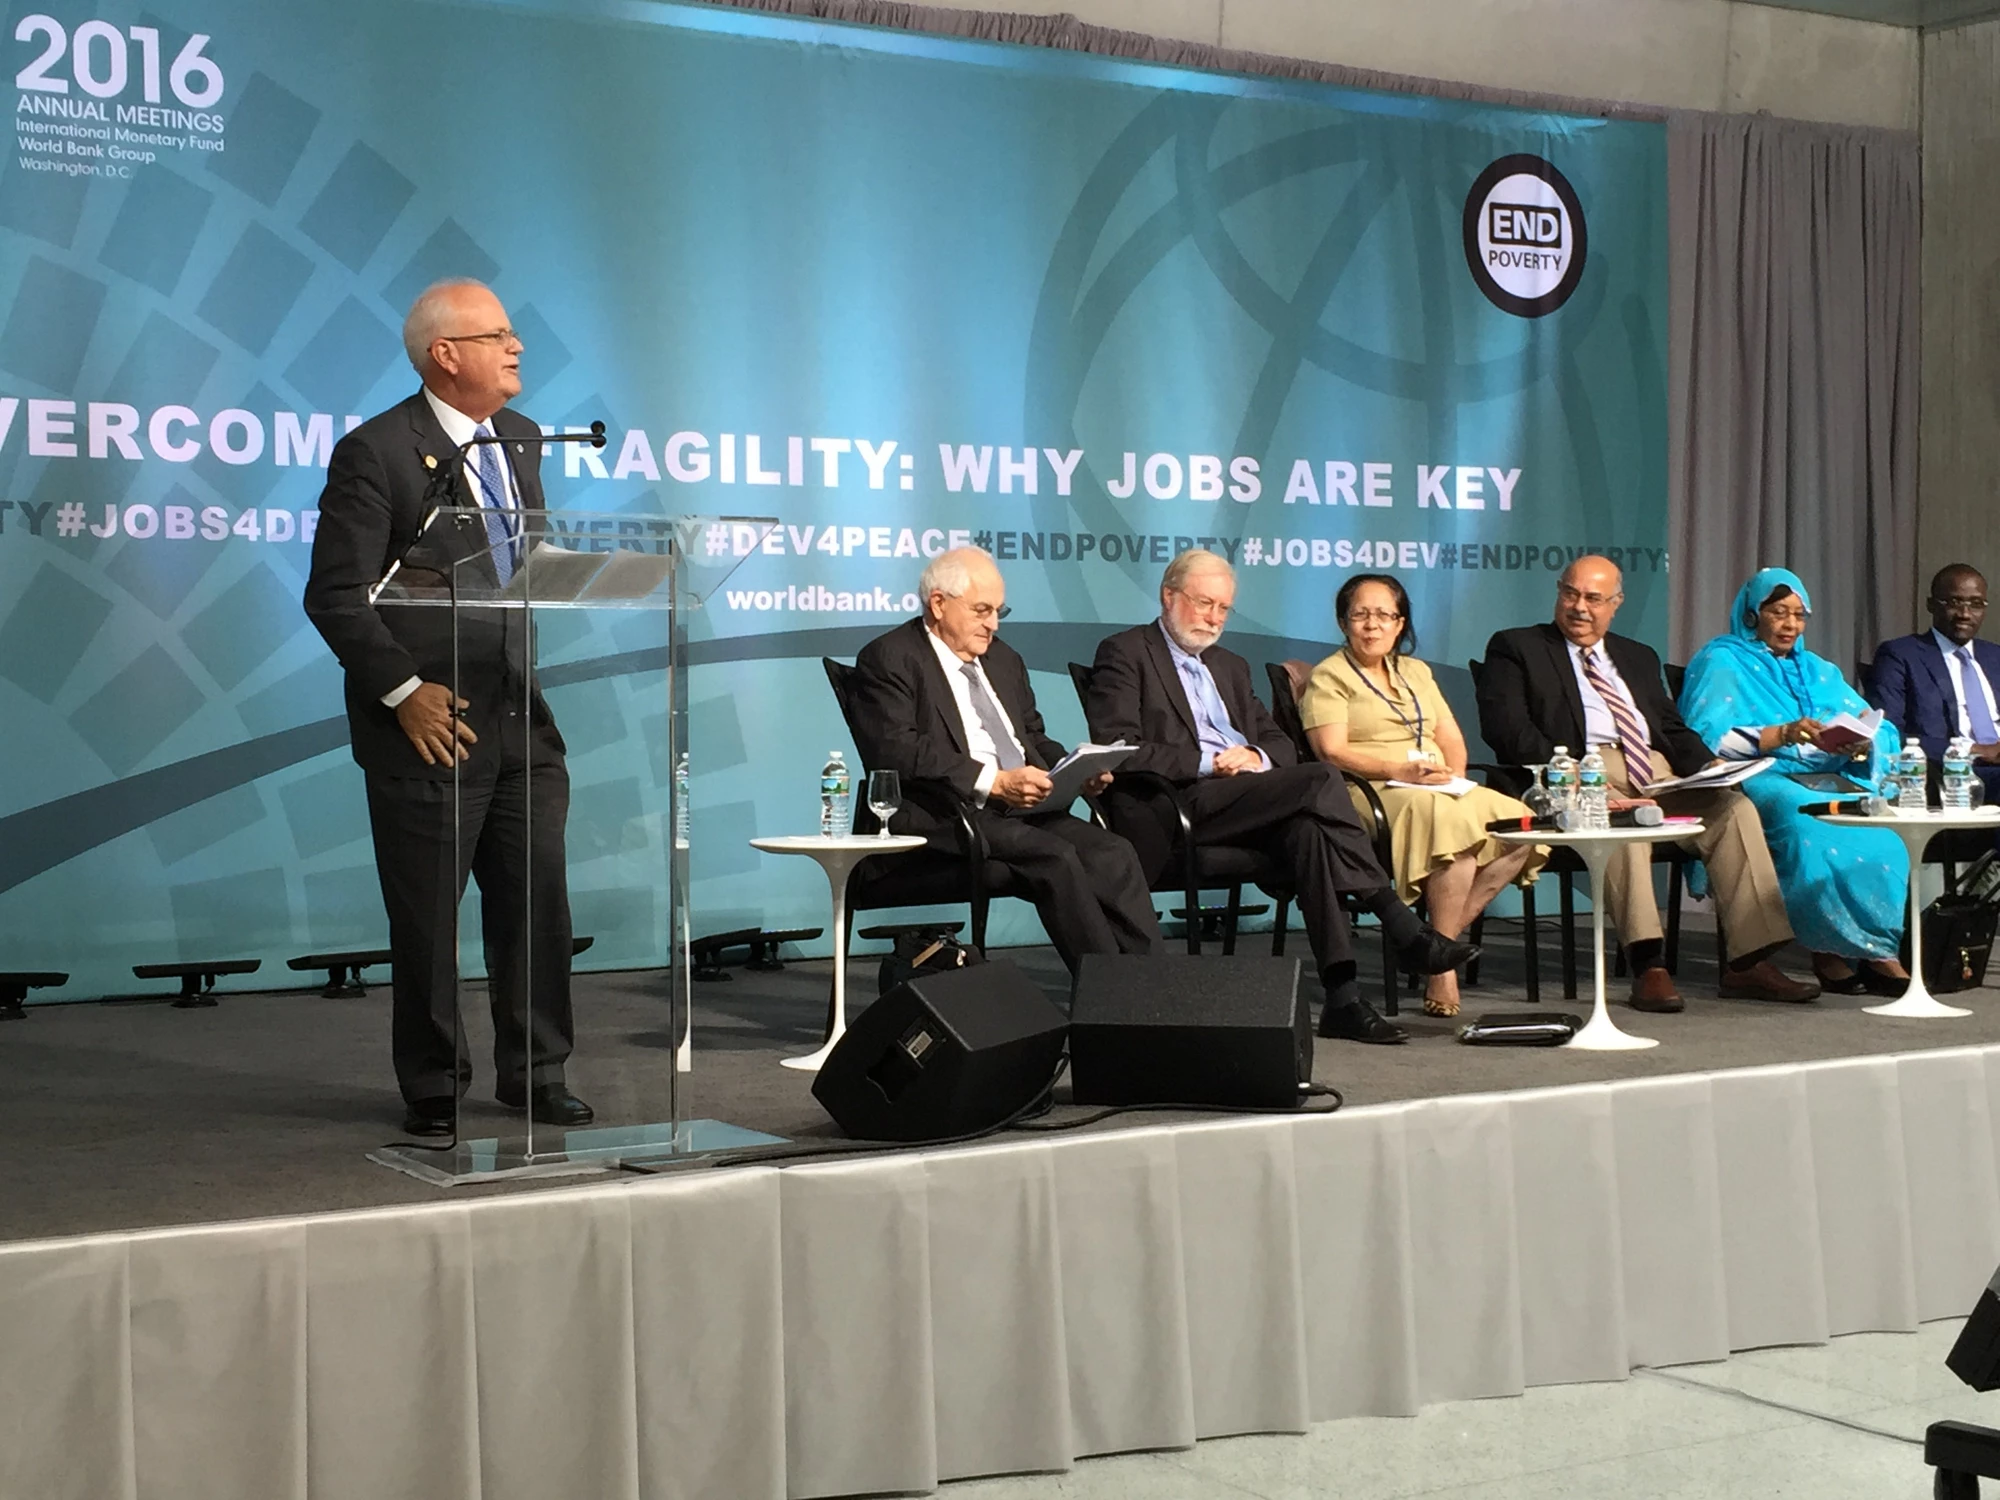  Why Jobs are Key, World Bank Live.